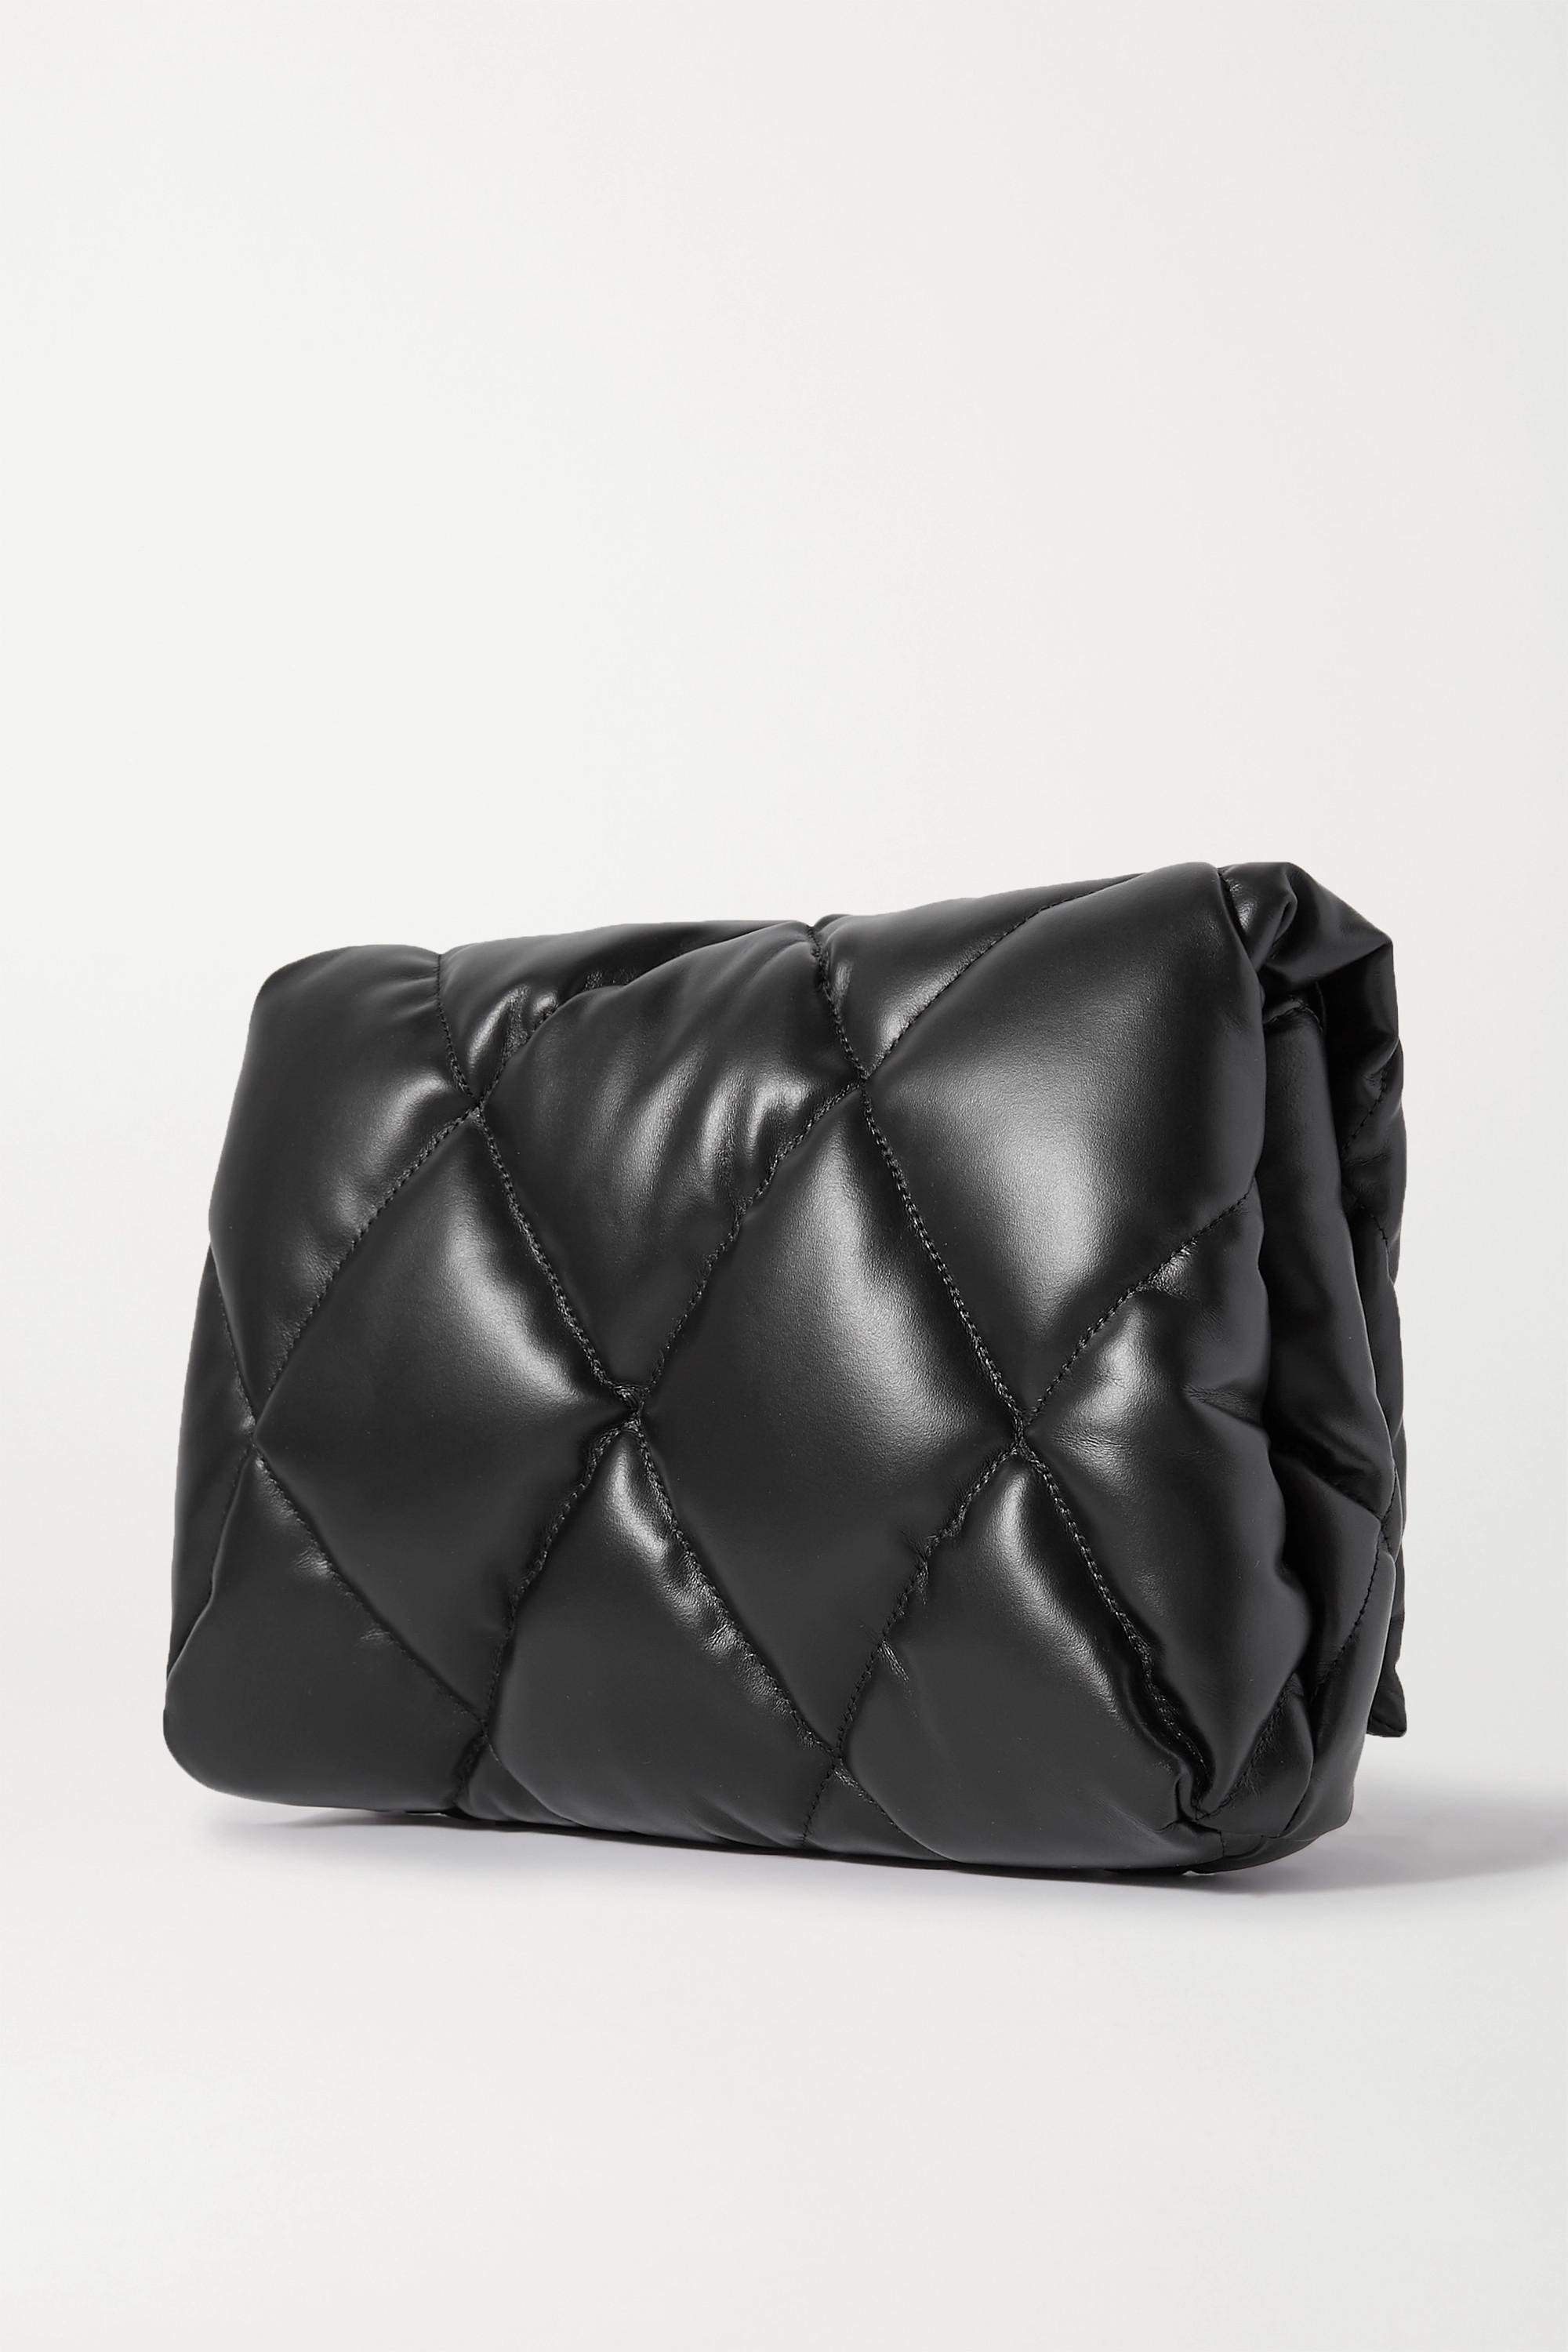 Touch Puffy leather handbag